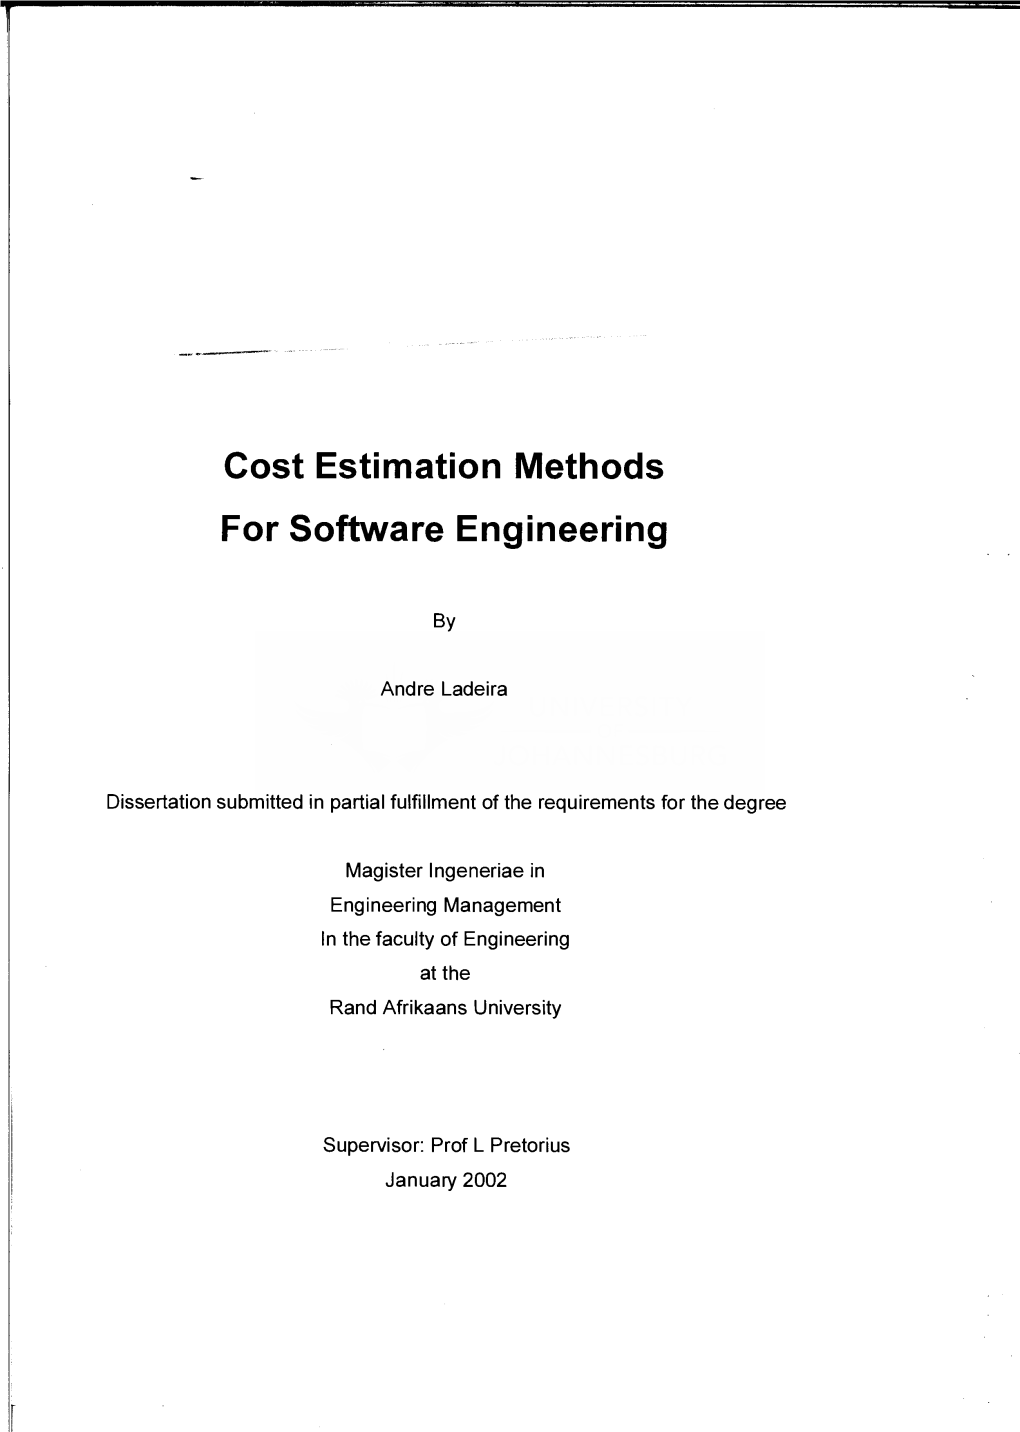 Cost Estimation Methods for Software Engineering